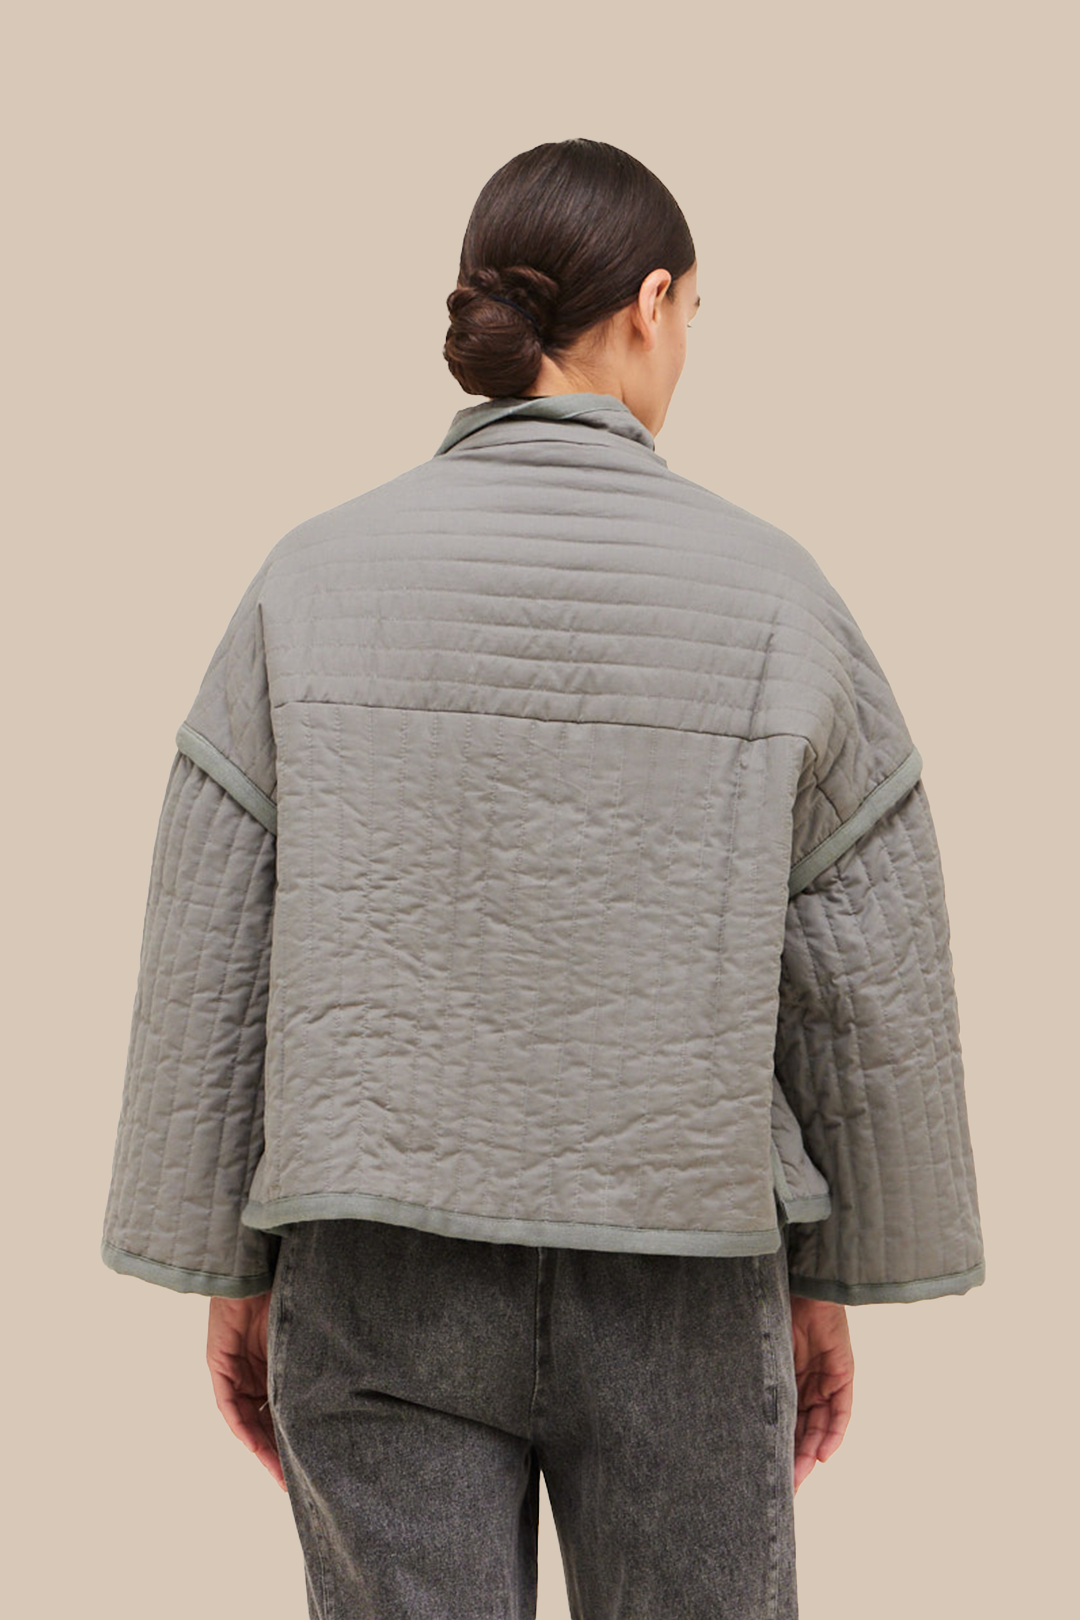 Marine Layer Quilted Jacket